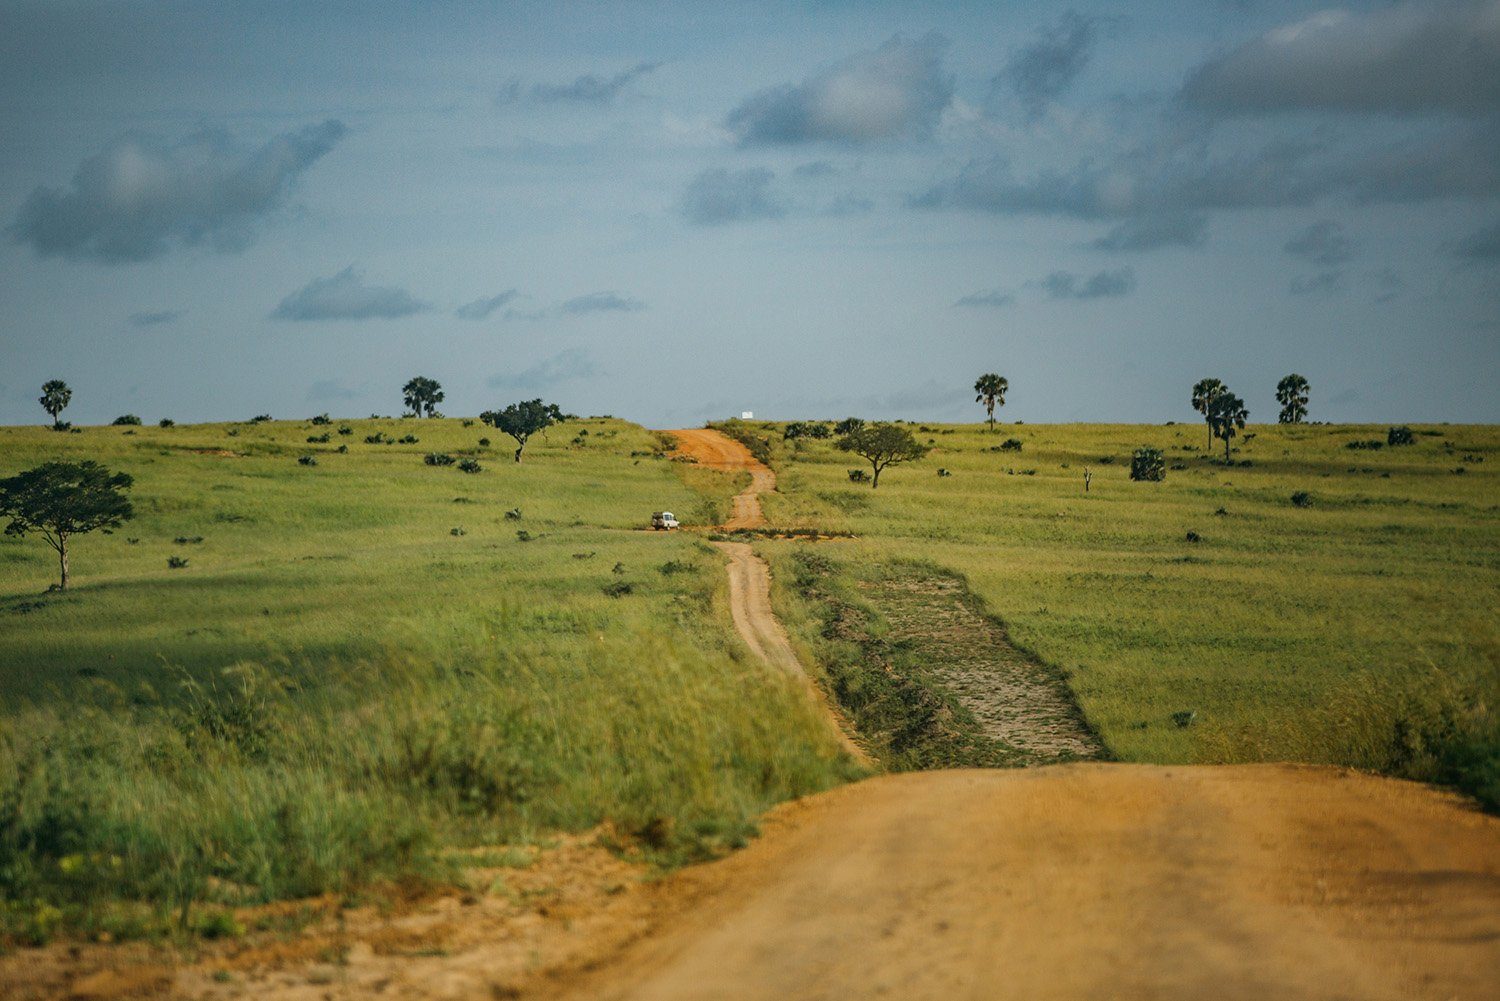 Notes from the Field: Africa